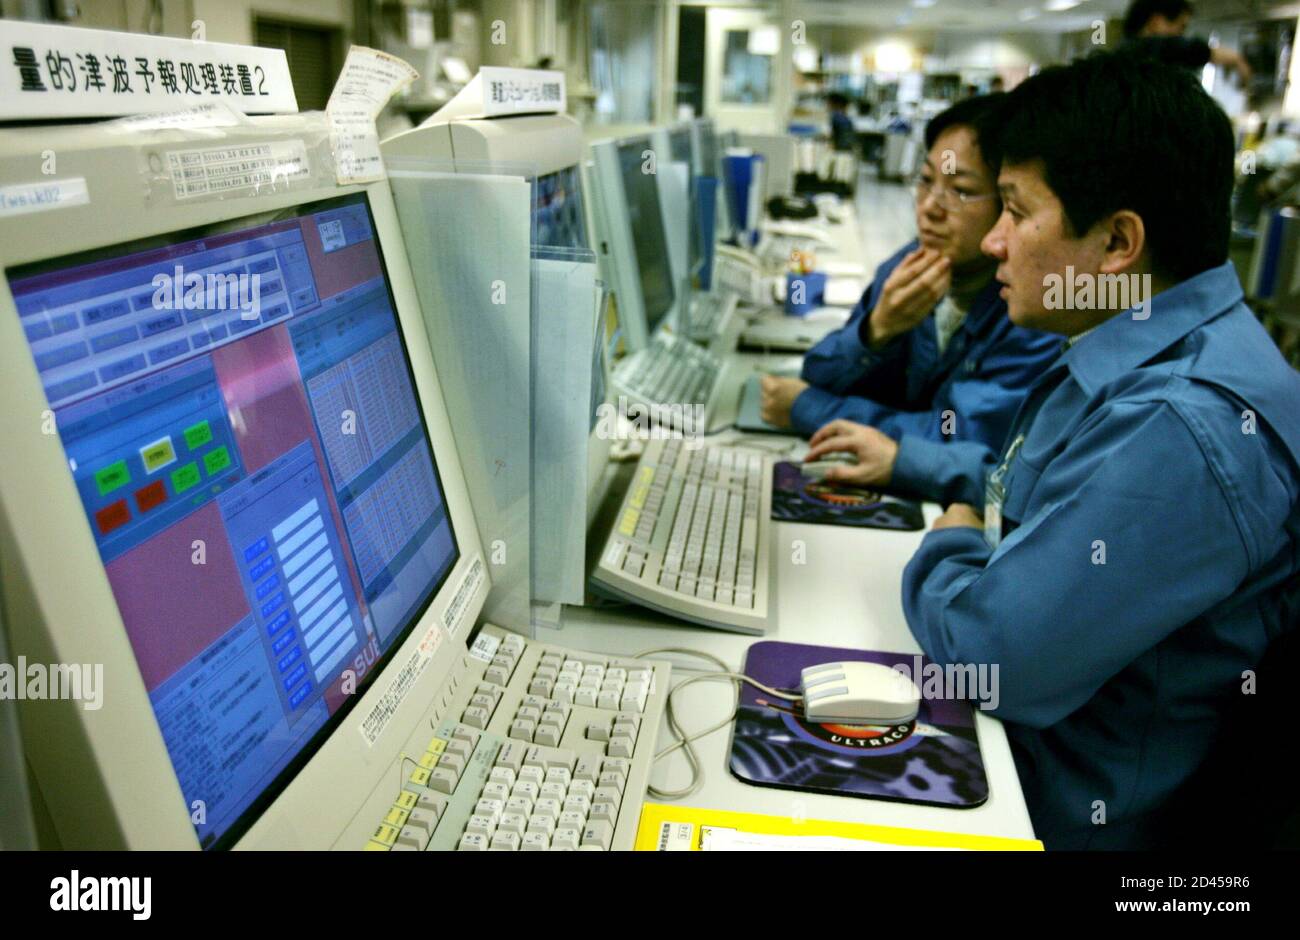 A Japan Meteorological Agency (JMA) staff monitors seismic activities at its centre in Tokyo January 7, 2005. The agency's earthquake and tsunami observation division monitors seismic activities and instantly map the focus and intensity of quakes and predict if a tsumani is to hit Japan's shores. Stock Photo